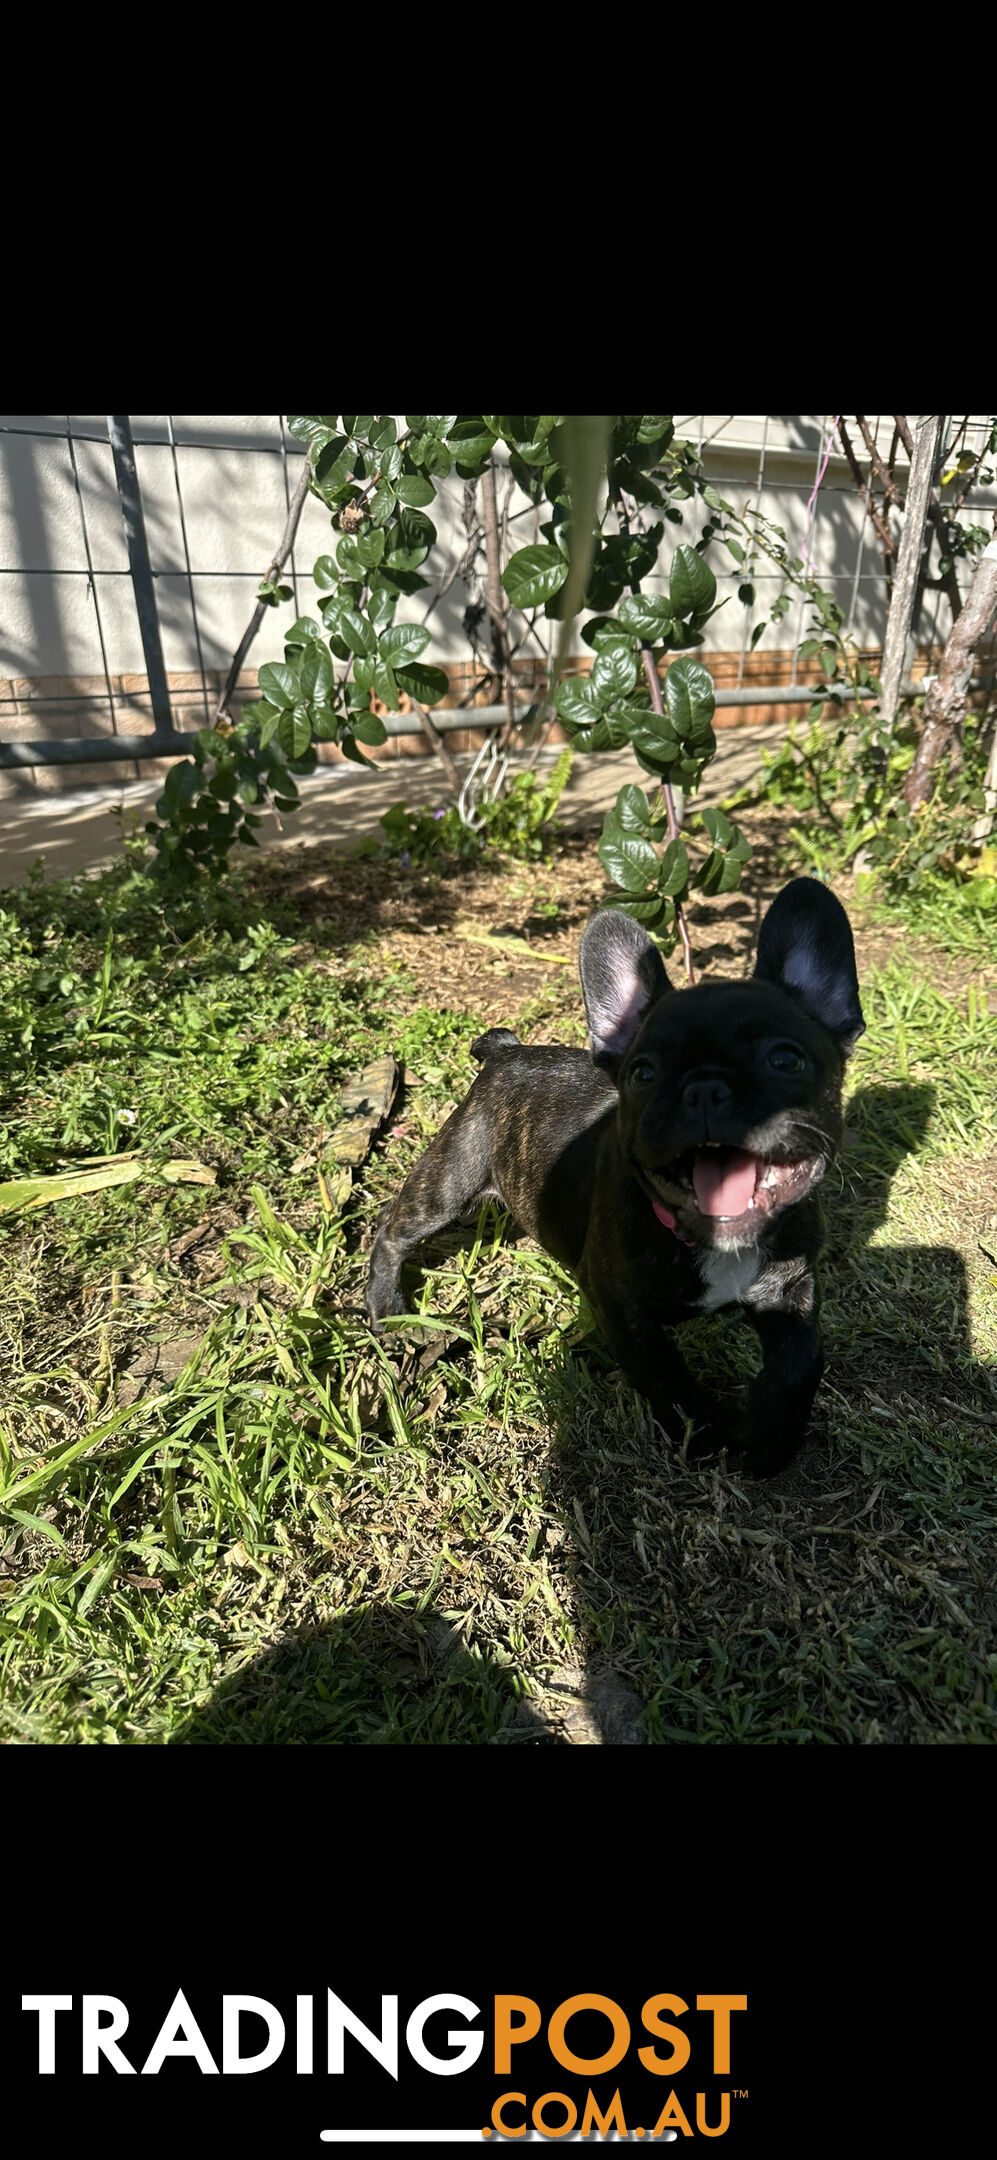 Purebred French bulldog Puppys ready to go to forever homes!